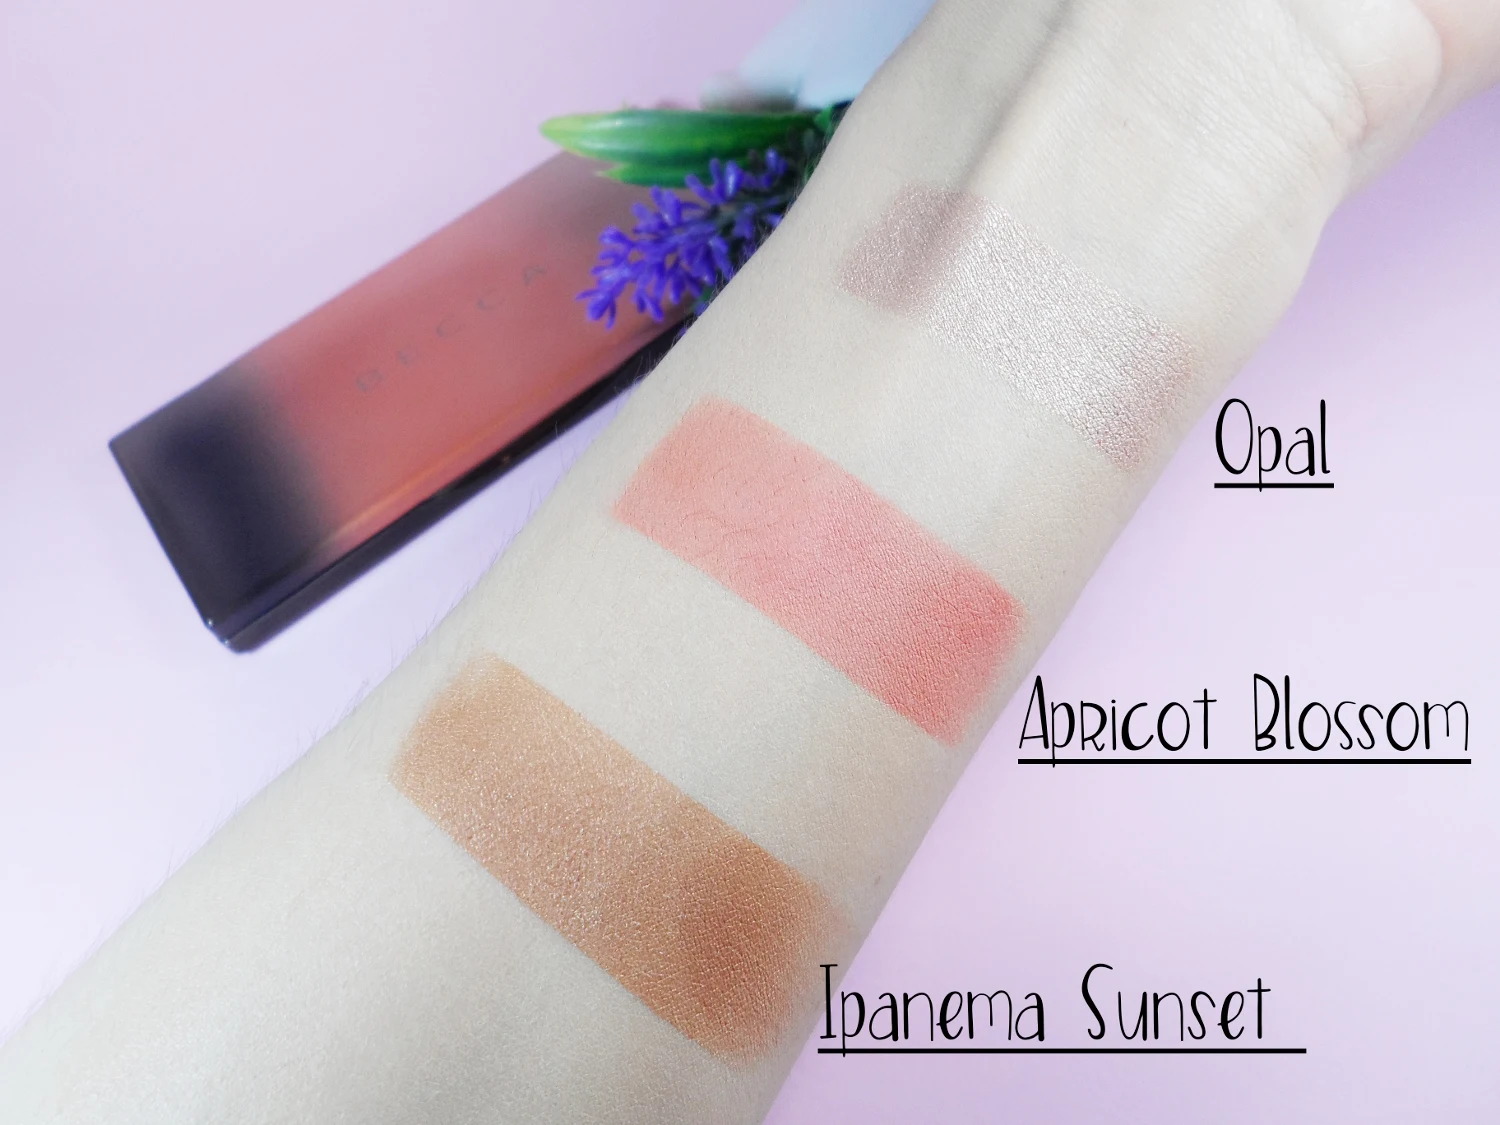 close-up swatches of makeup contouring palette by Becca Cosmetics on a light skin